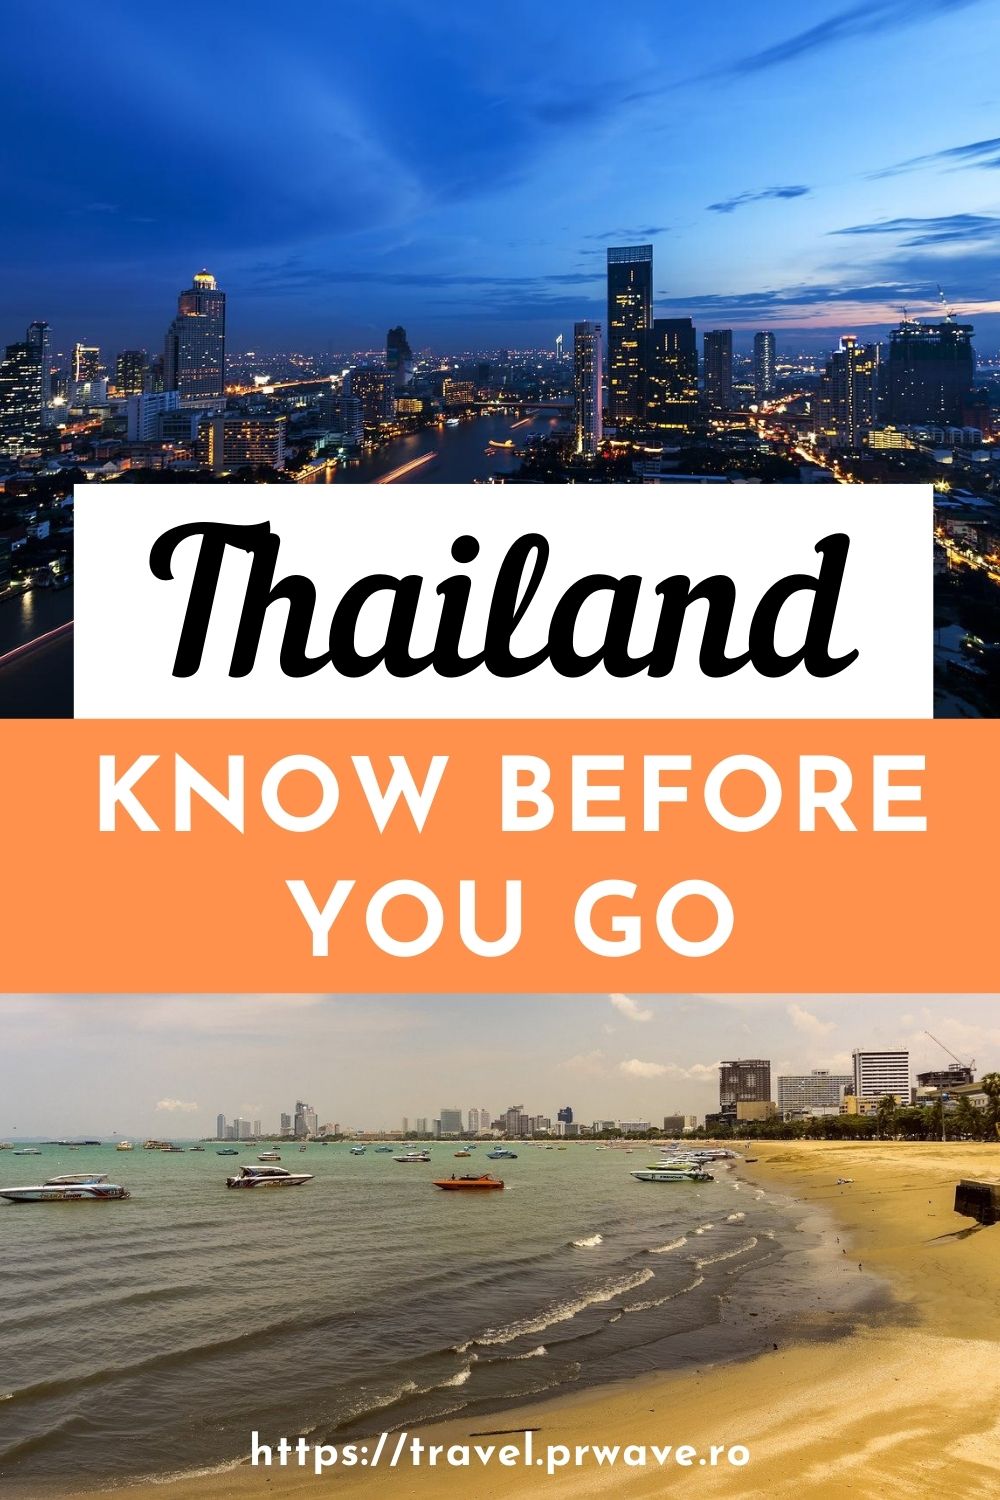 Things to know before visiting Thailand. Discover the best Thailand travel tips to help you have the perfect Thailand vacation. Plan your Thailand trip with these tips! #thailand #thailandtrip #thailandtravel #asiatravel #thailandthingstoknow #traveldestinations #asia #traveltips